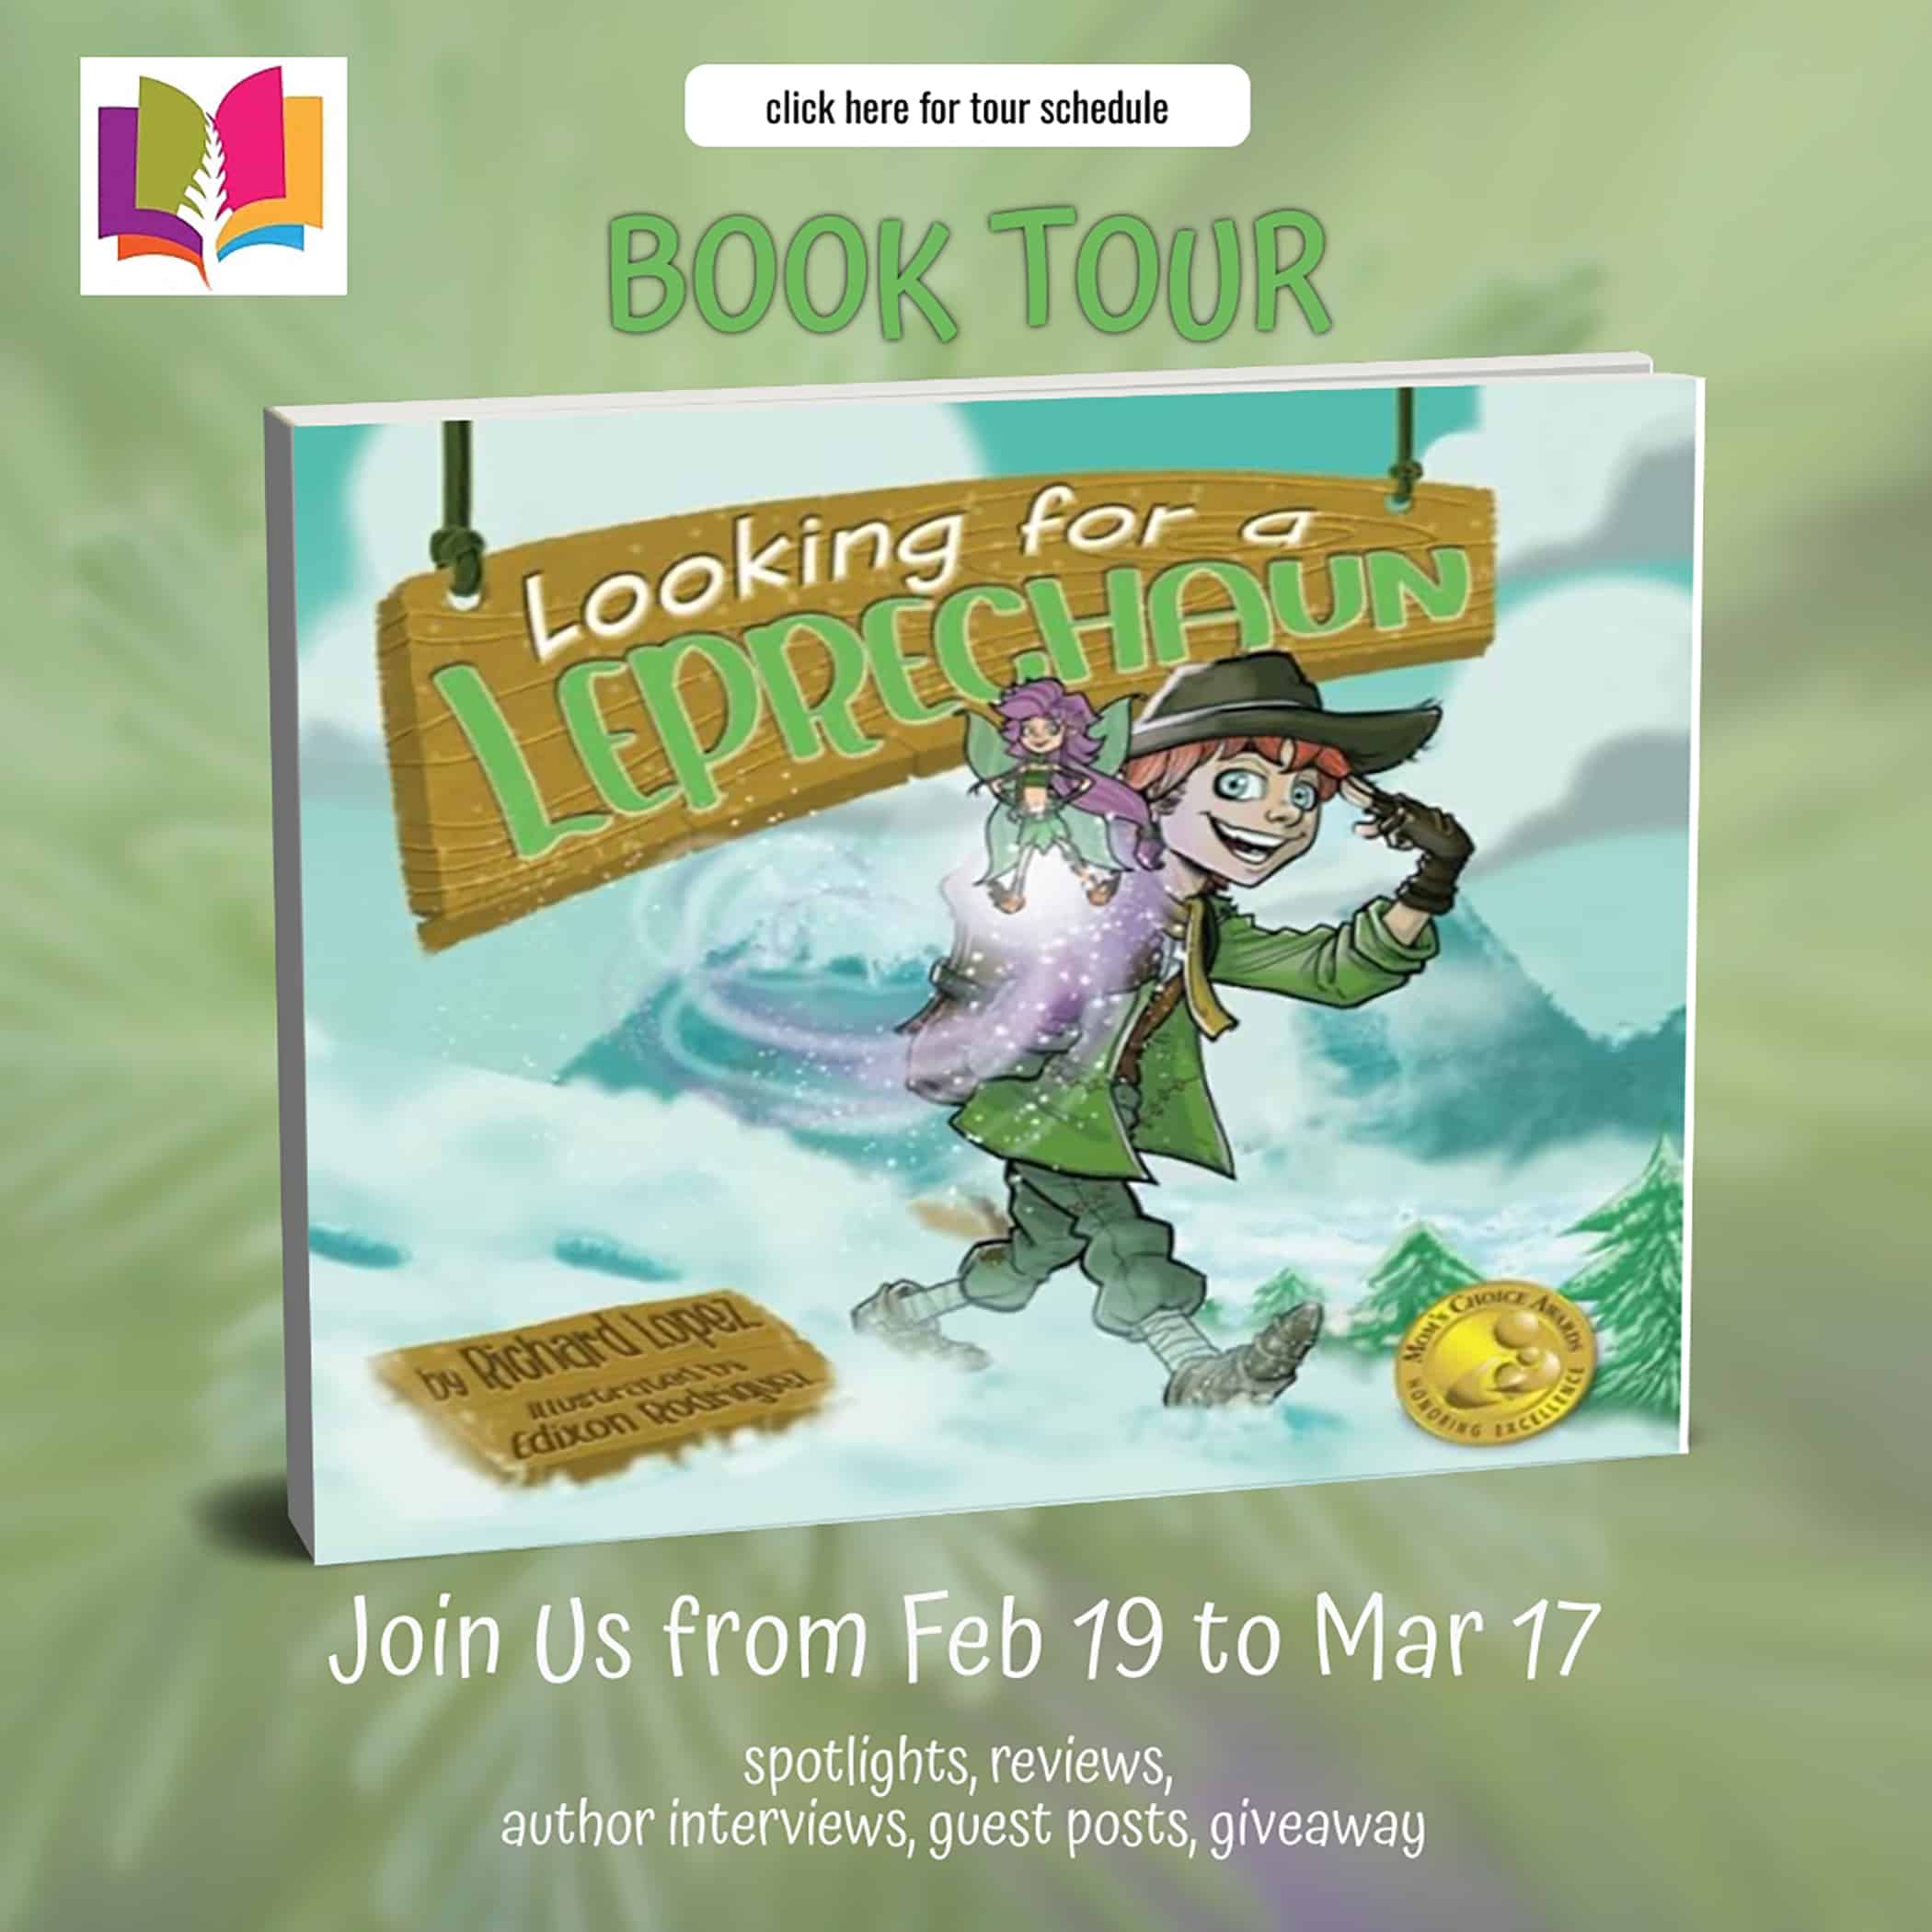 Children's Book Review| Looking for a Leprechaun by Richard Lopez | 1 Signed Copy Available | #ChildrensPictureBook #SelfEsteem #Confidence #Belonging | @iReadBookTours @acornsiReadBookTours @tlb.publishing